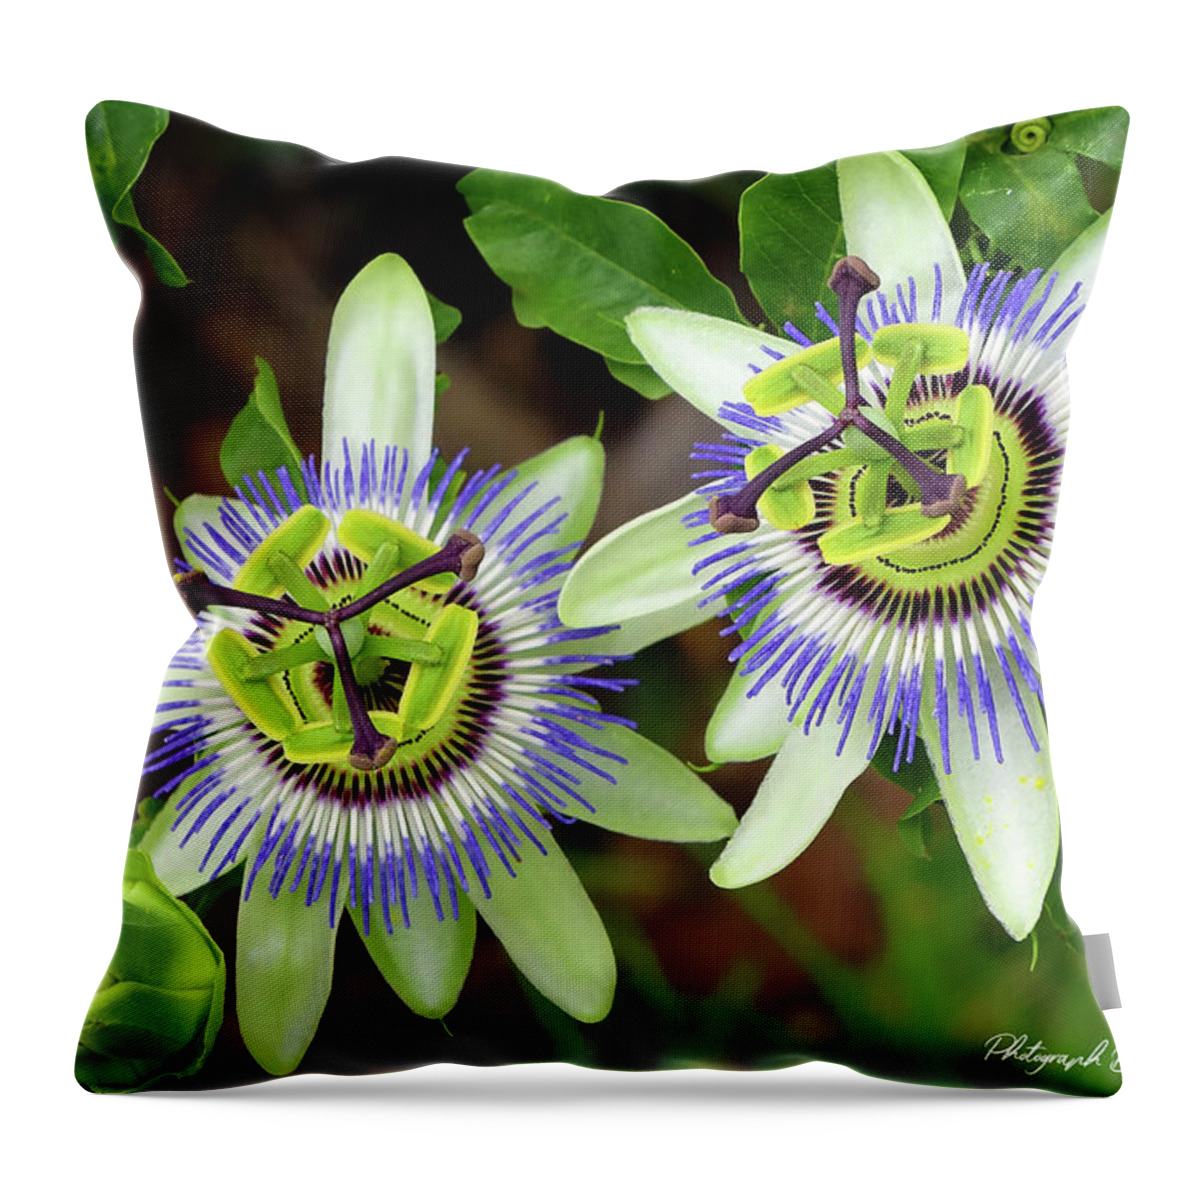 Passion Flowers Throw Pillow featuring the digital art Passion Flowers 09921 by Kevin Chippindall